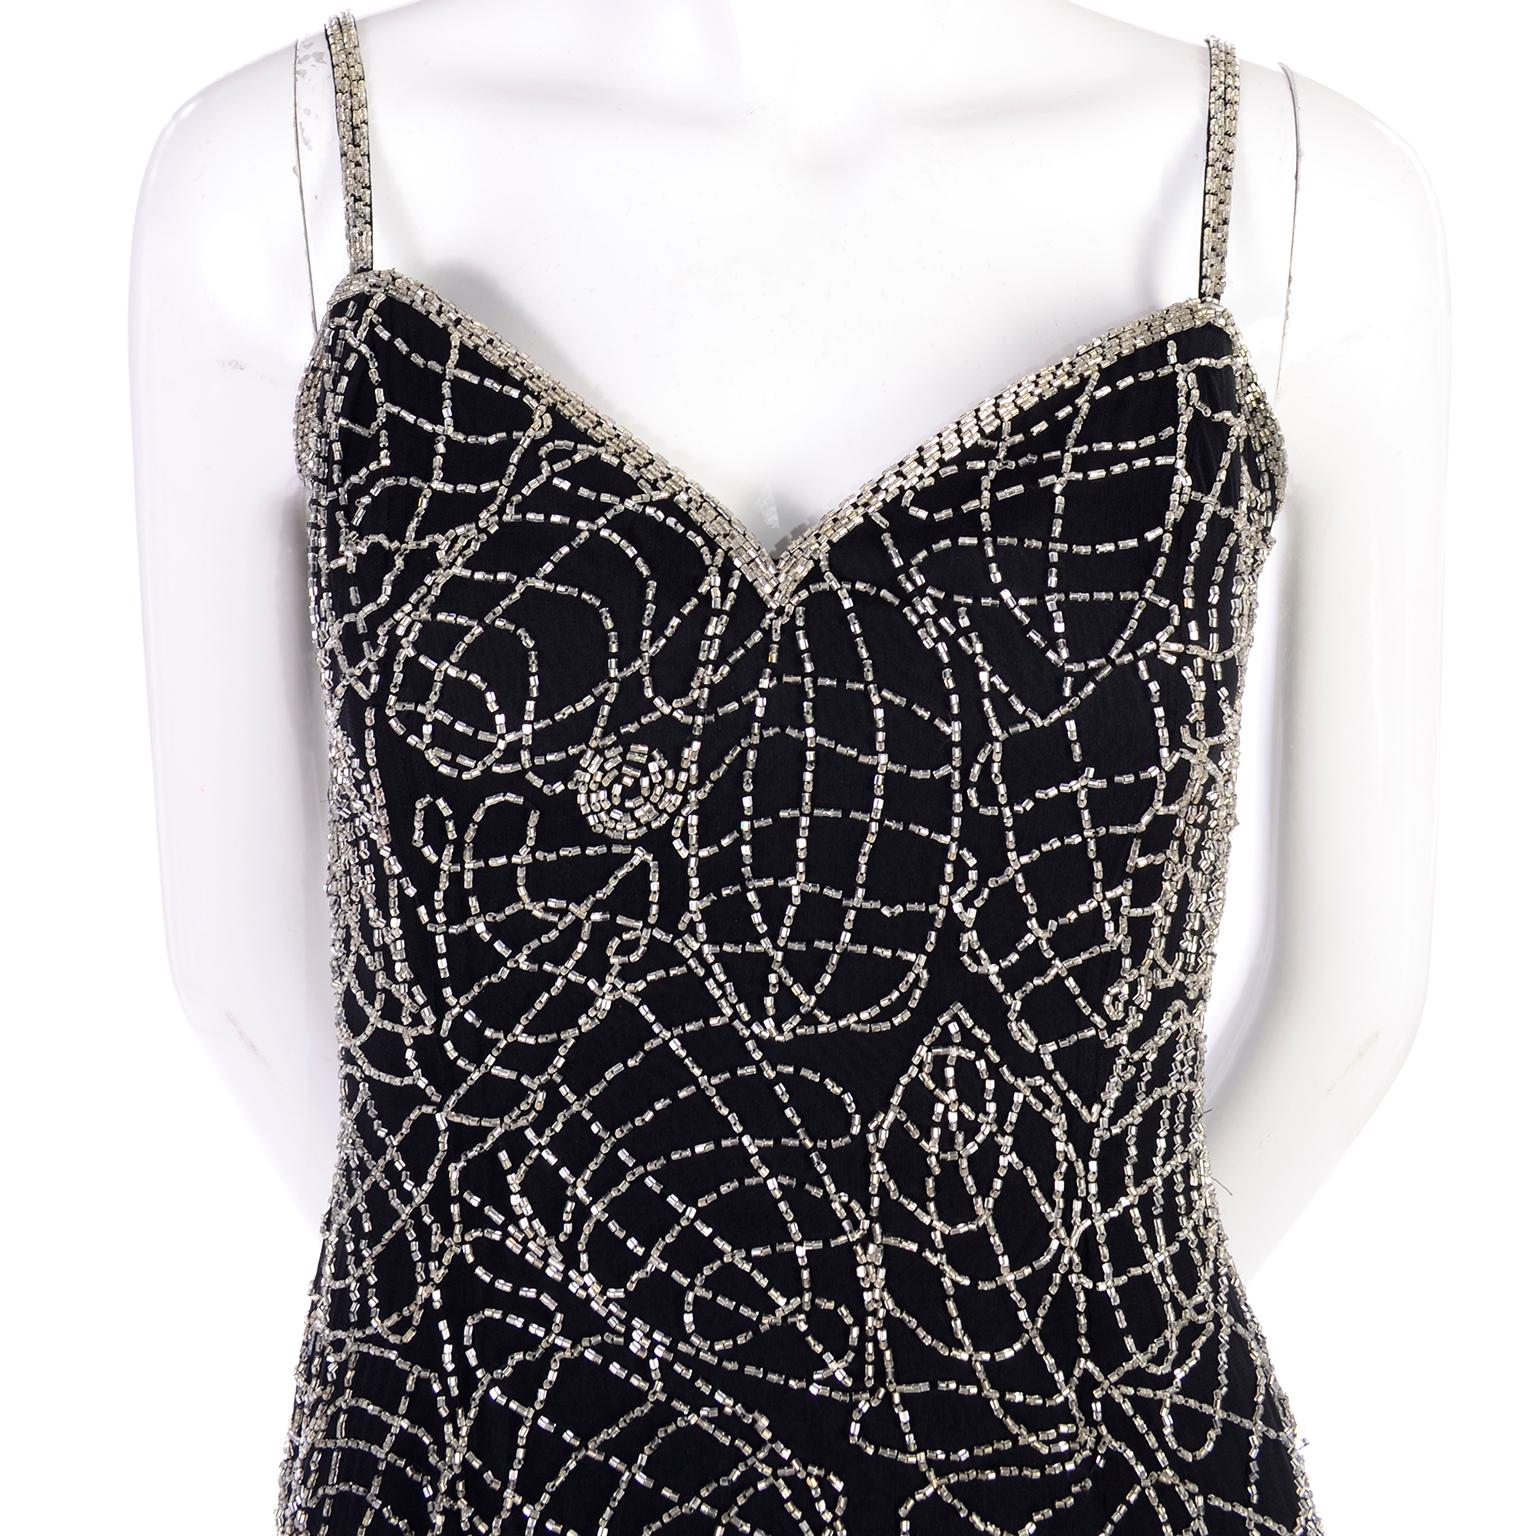 This is a great black silk vintage cocktail dress with abstract silver sparkling swirls of beading. Lined in rayon, this fitted dress has built-in boning in the bustier. Marked as a 6, but measures more like a US size 4. 